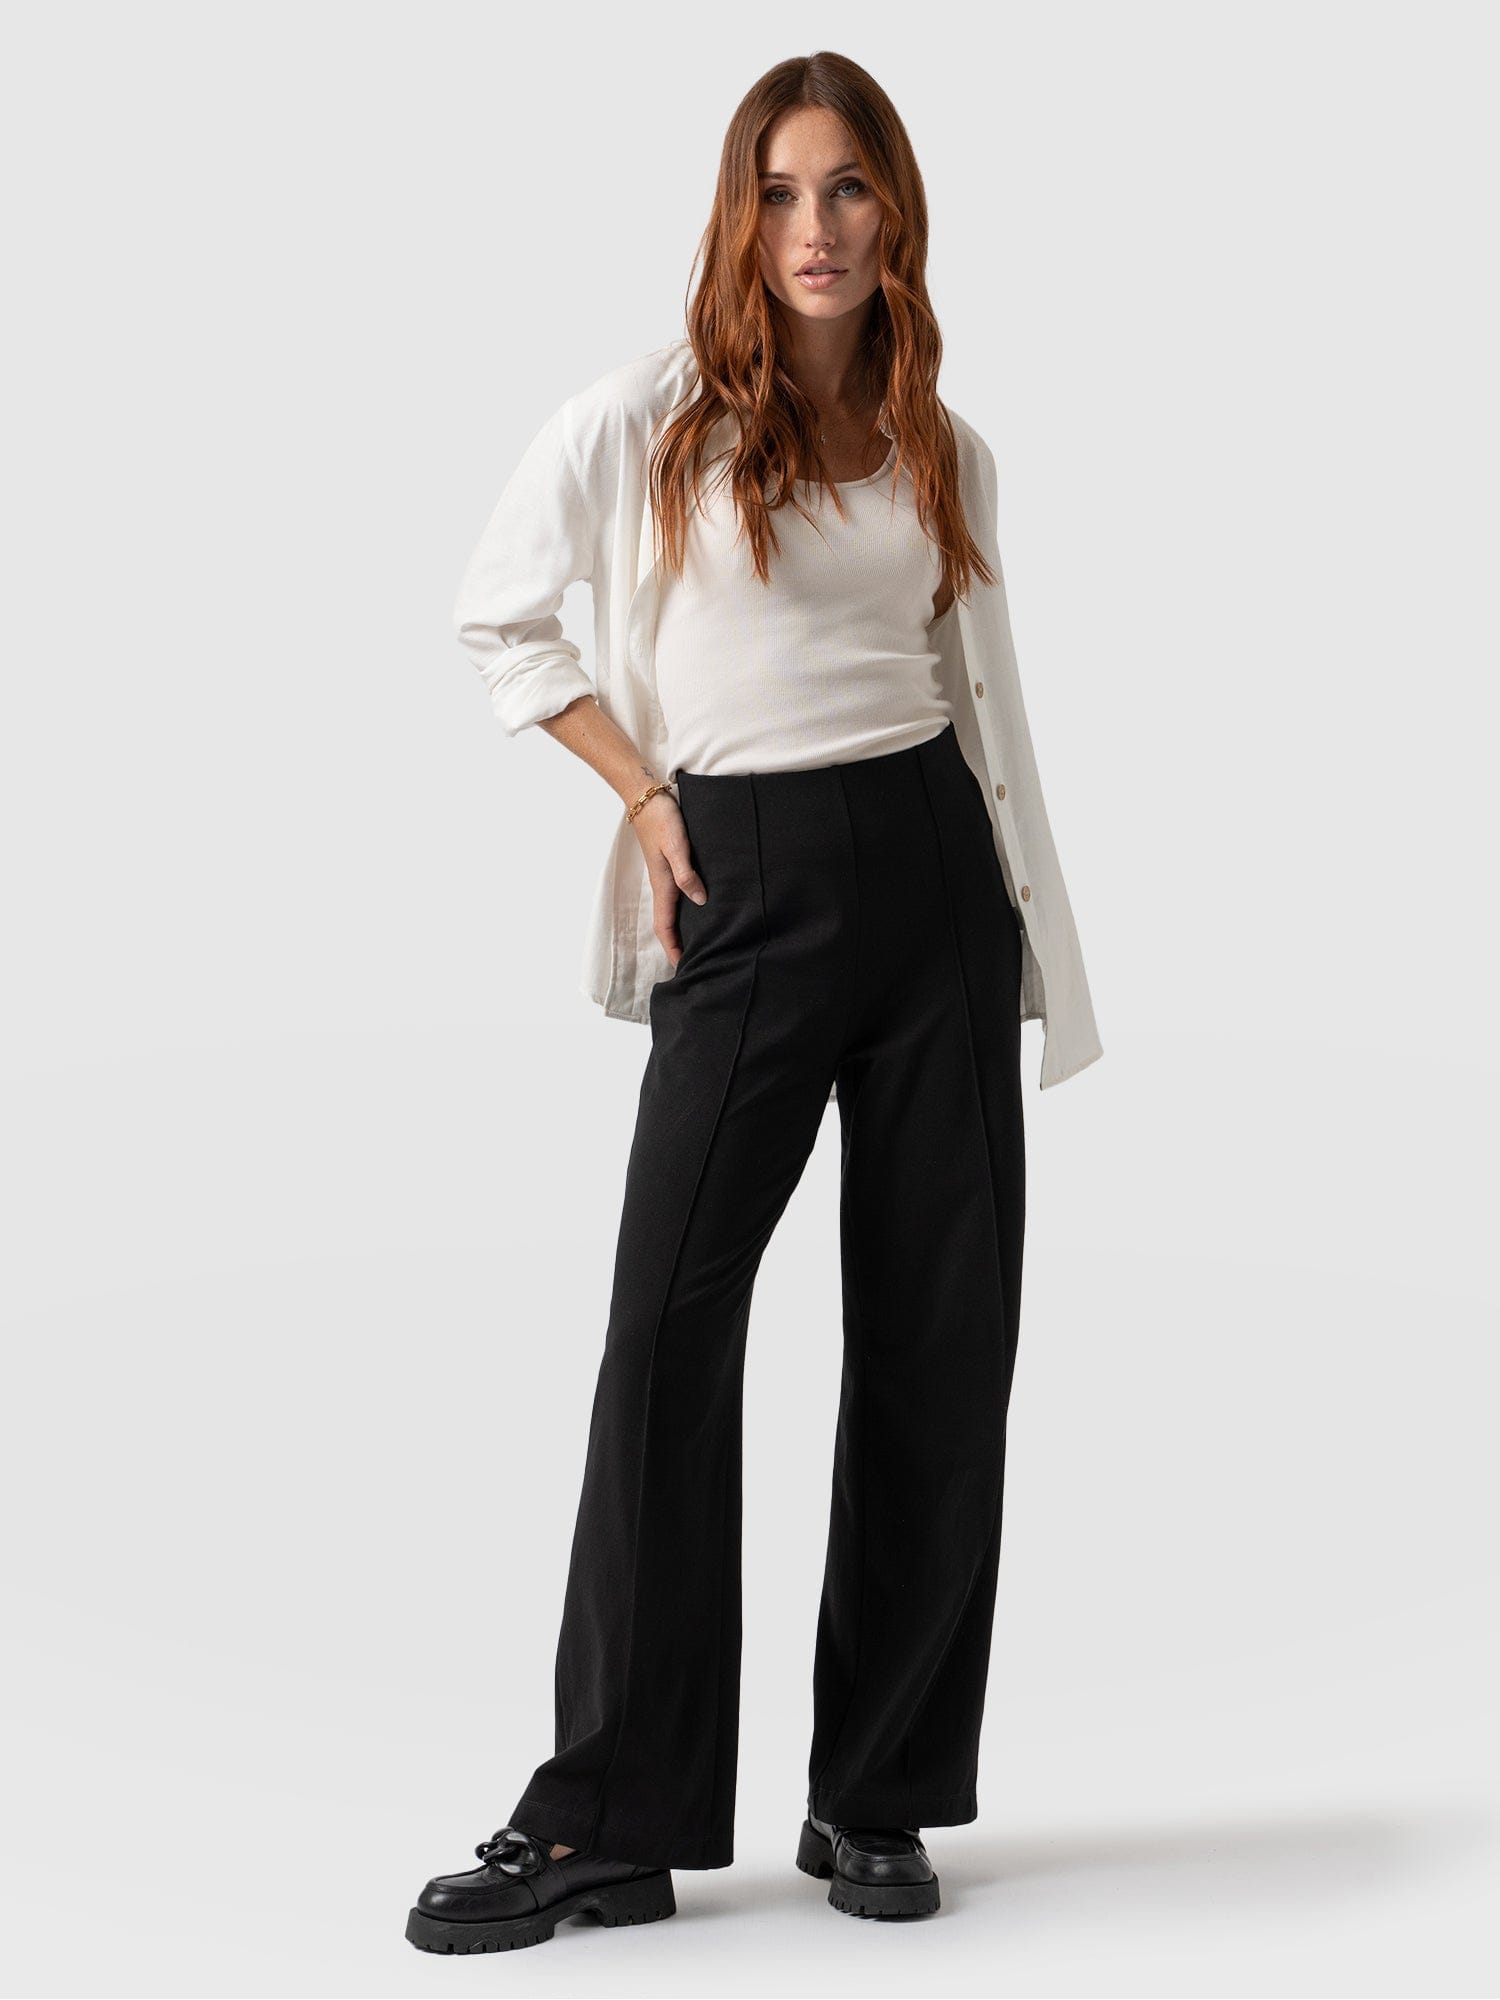 Multiuse Trousers Women's | Montbell Euro